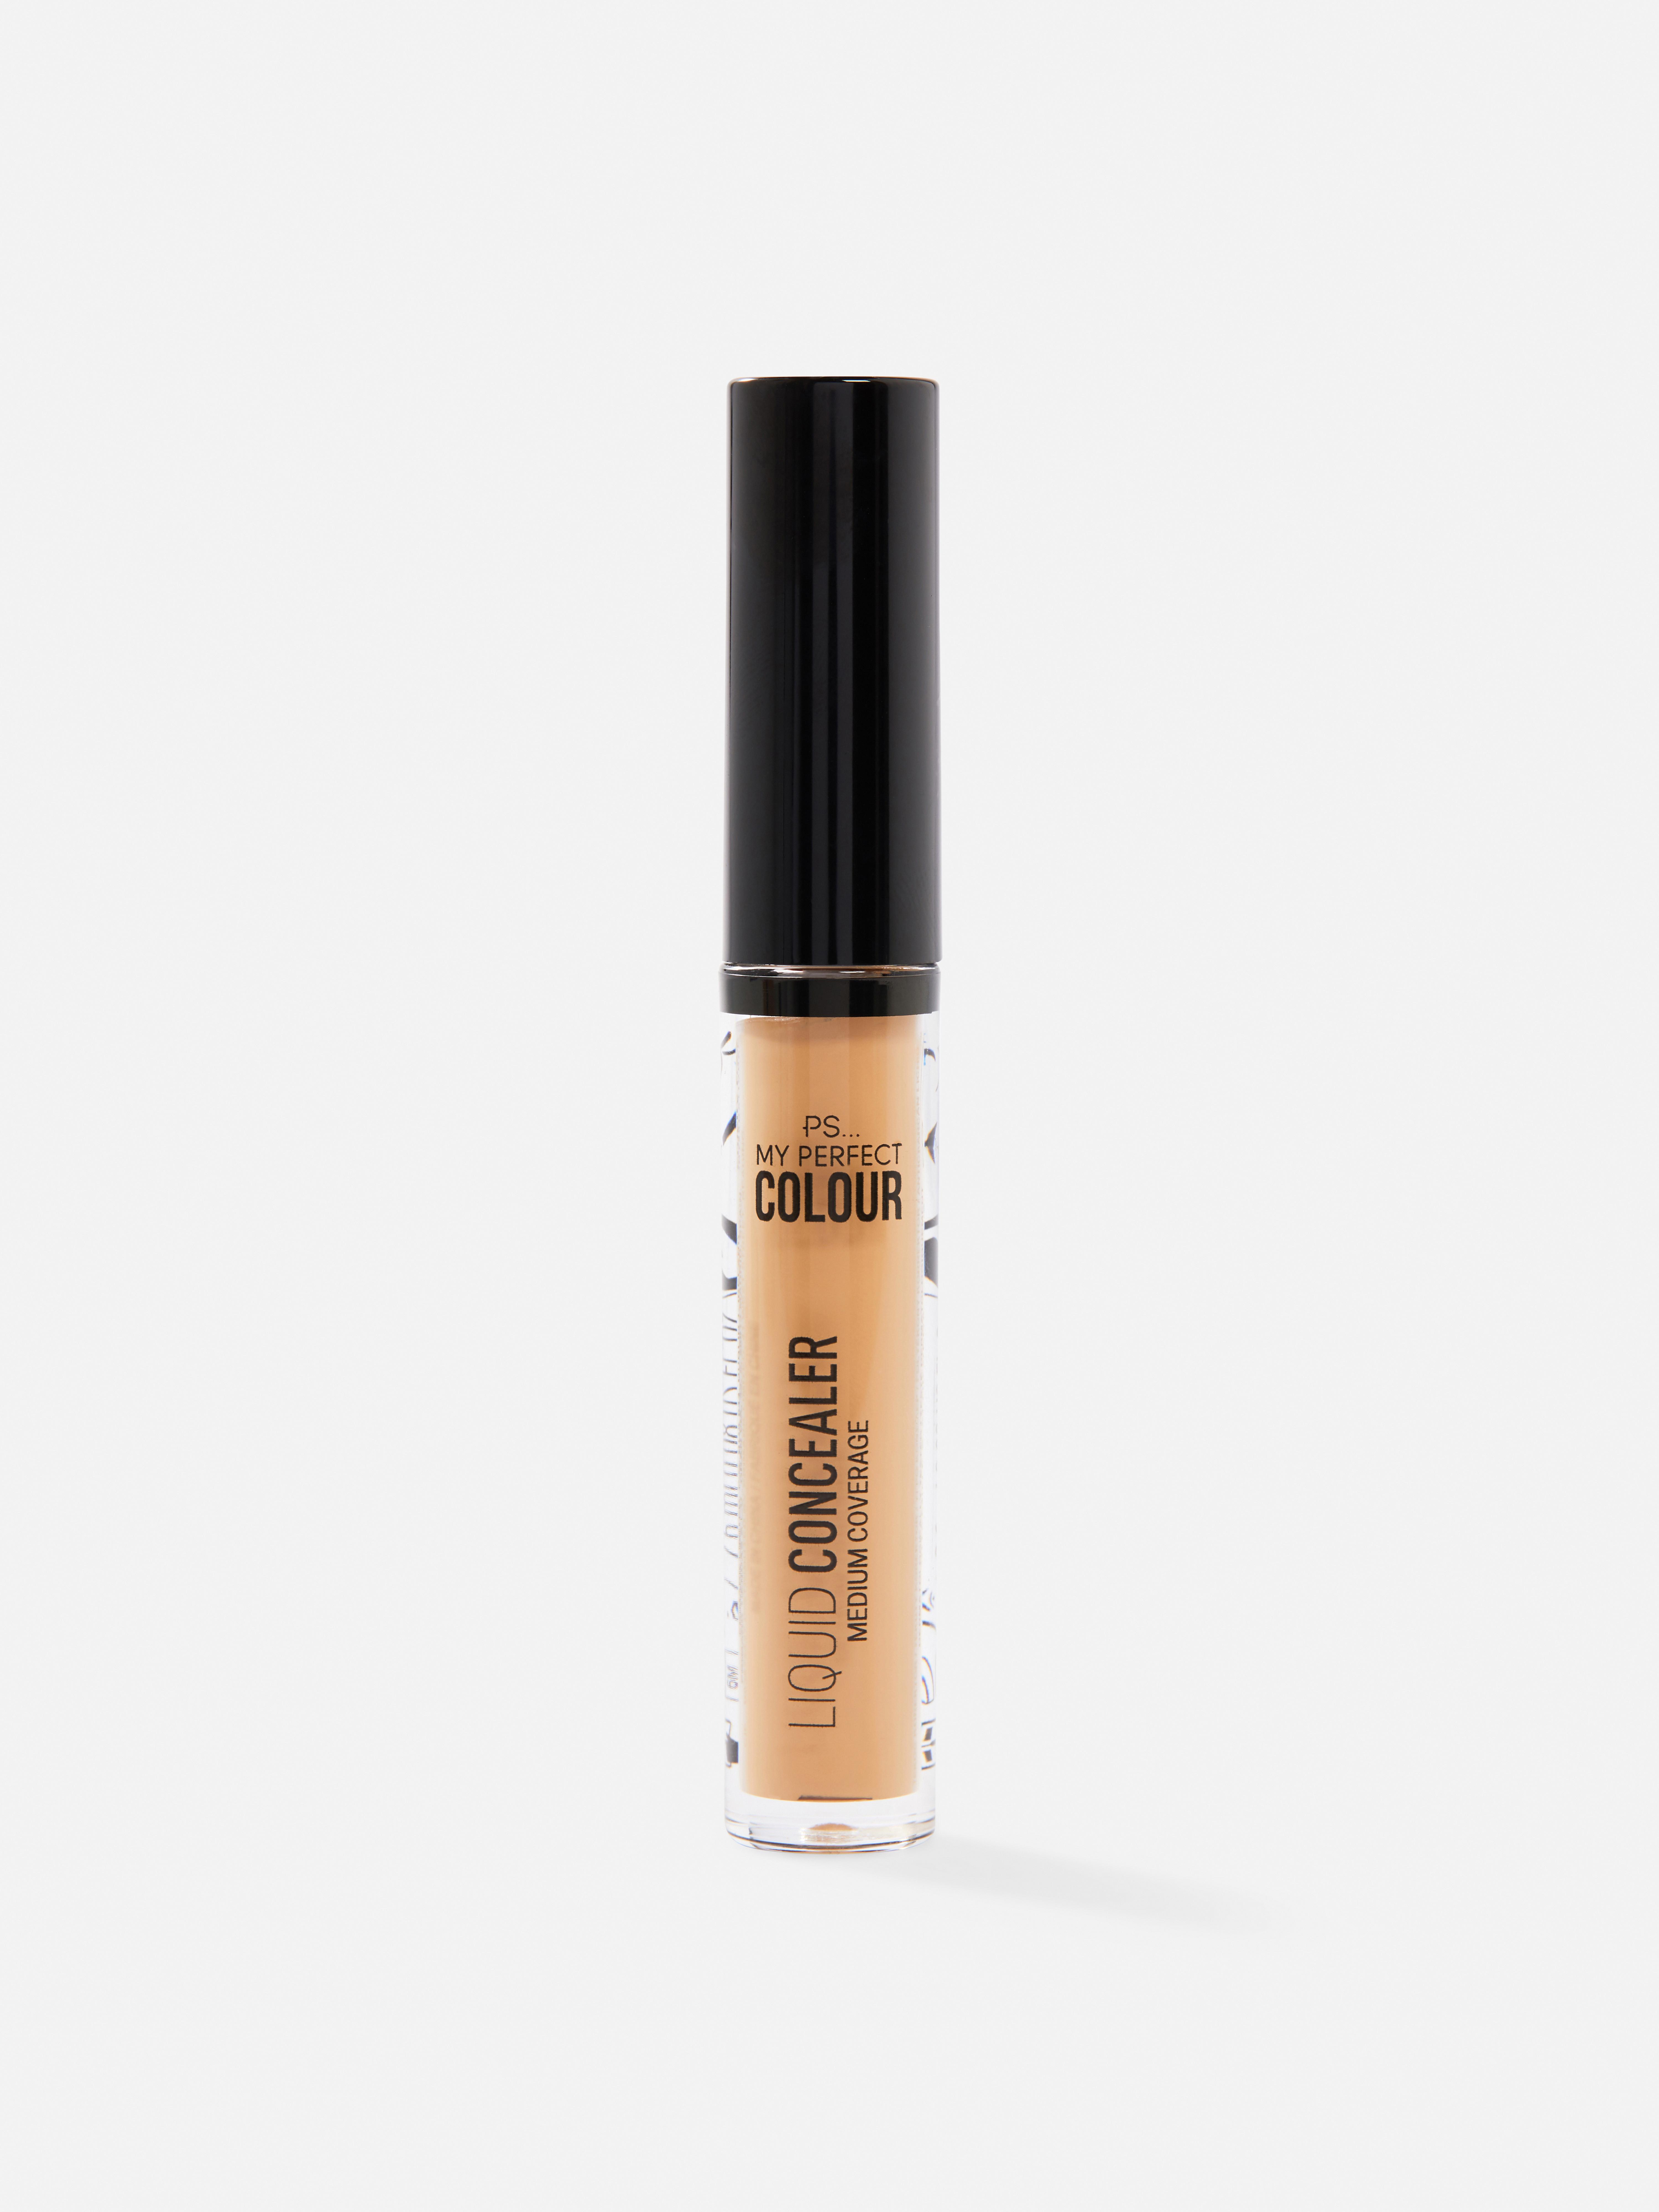 PS... My Perfect Colour Concealer